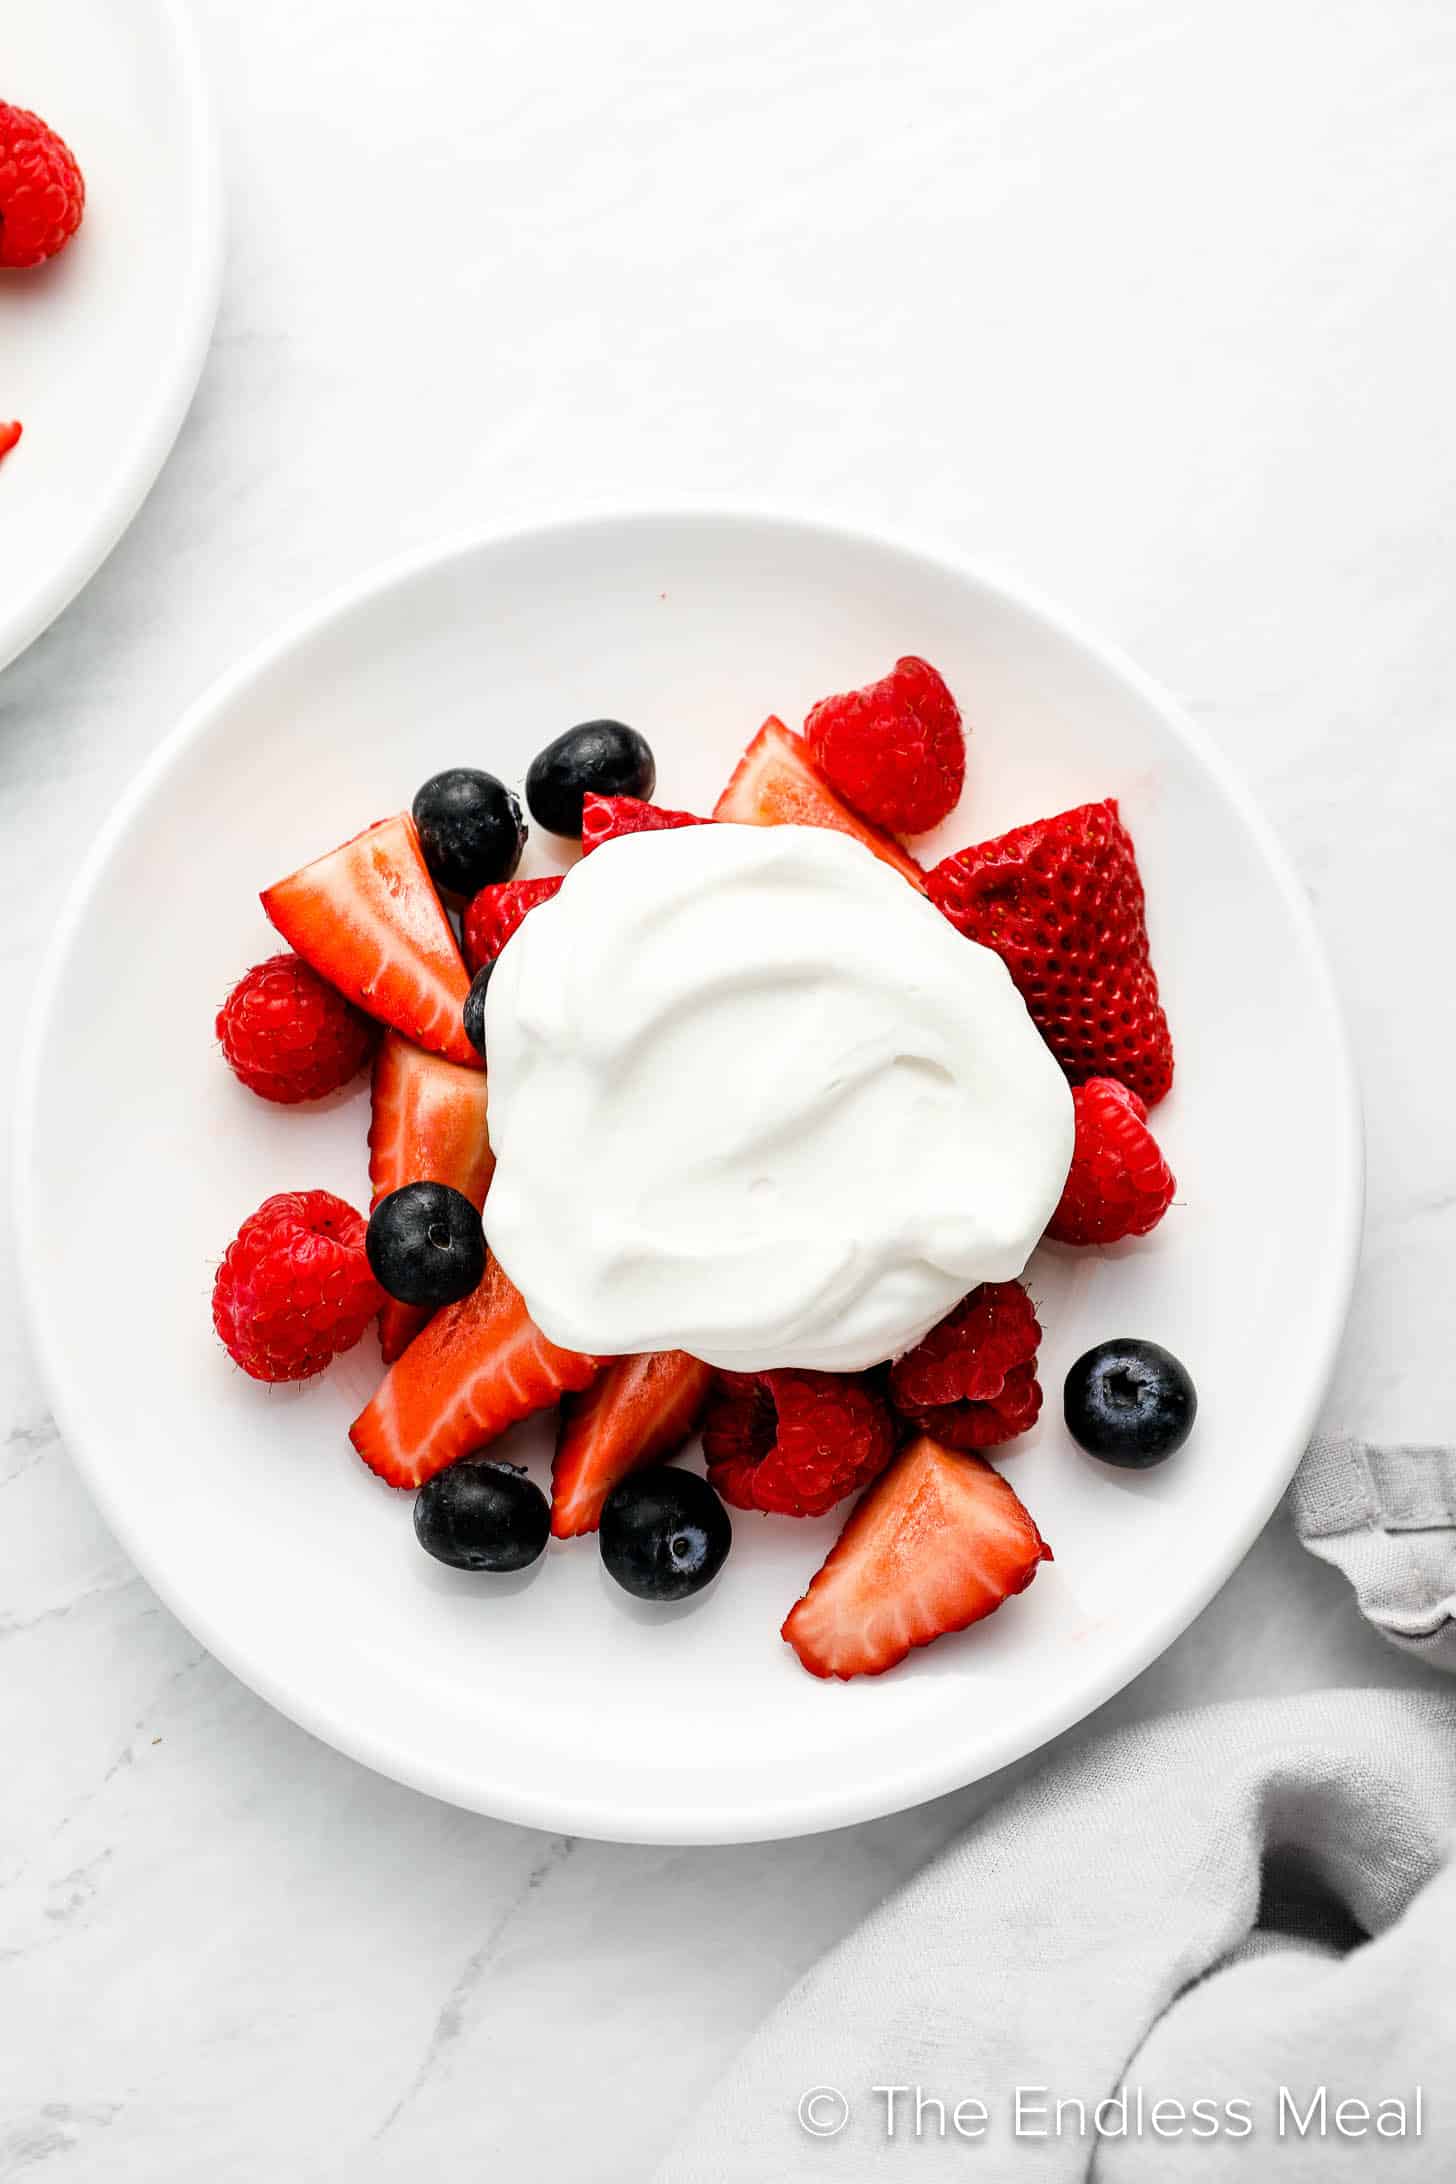 Berries topped with whipped coconut cream